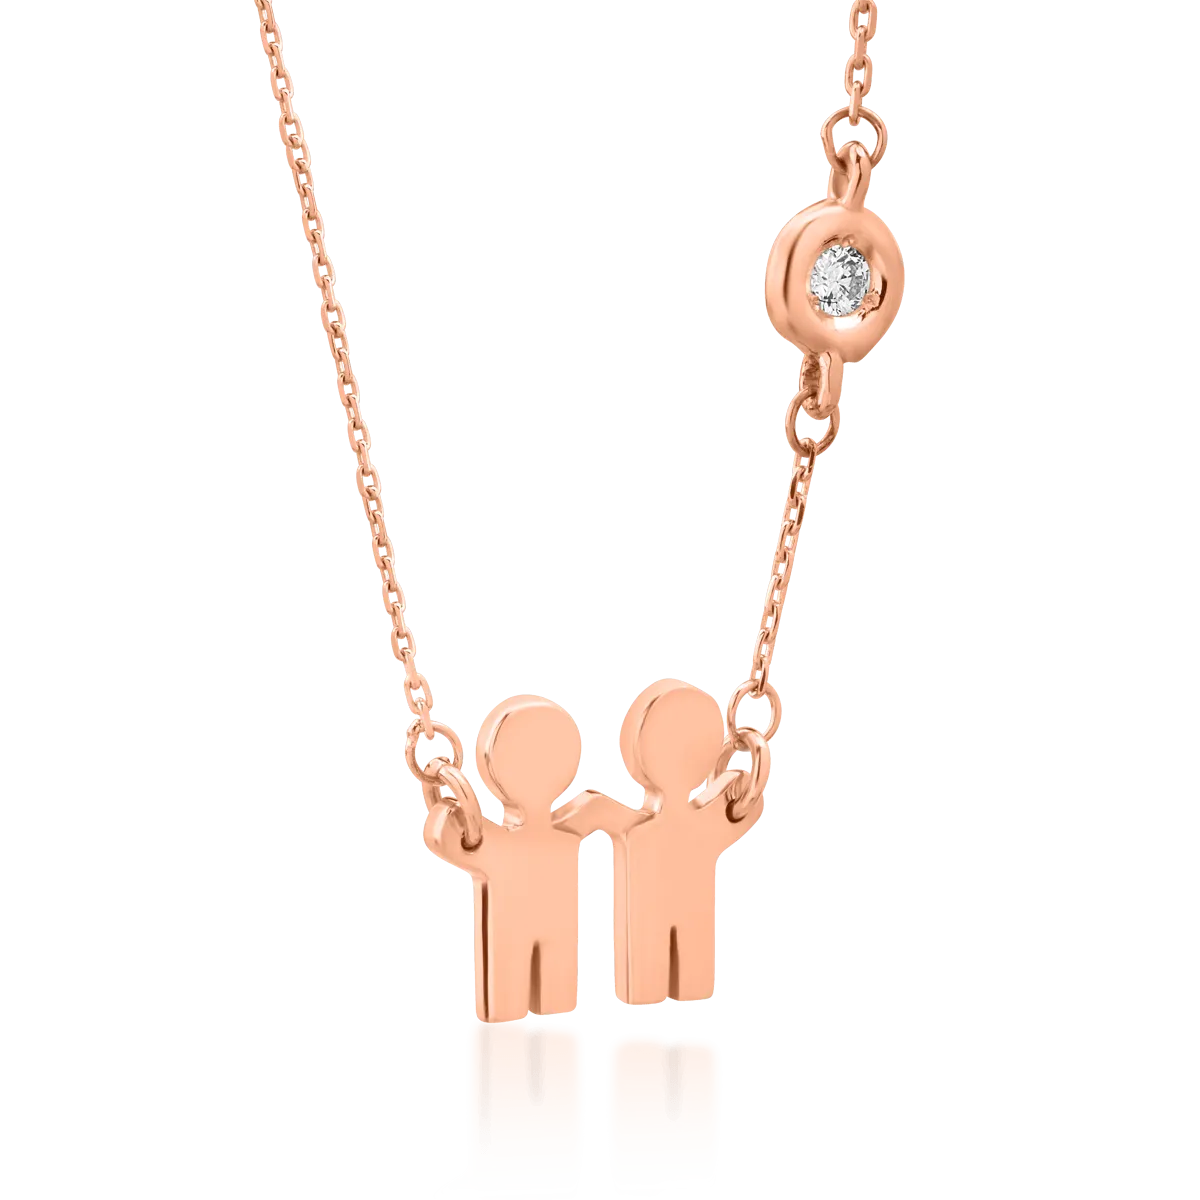 14K rose gold pendant necklace with diamond of 0.02ct